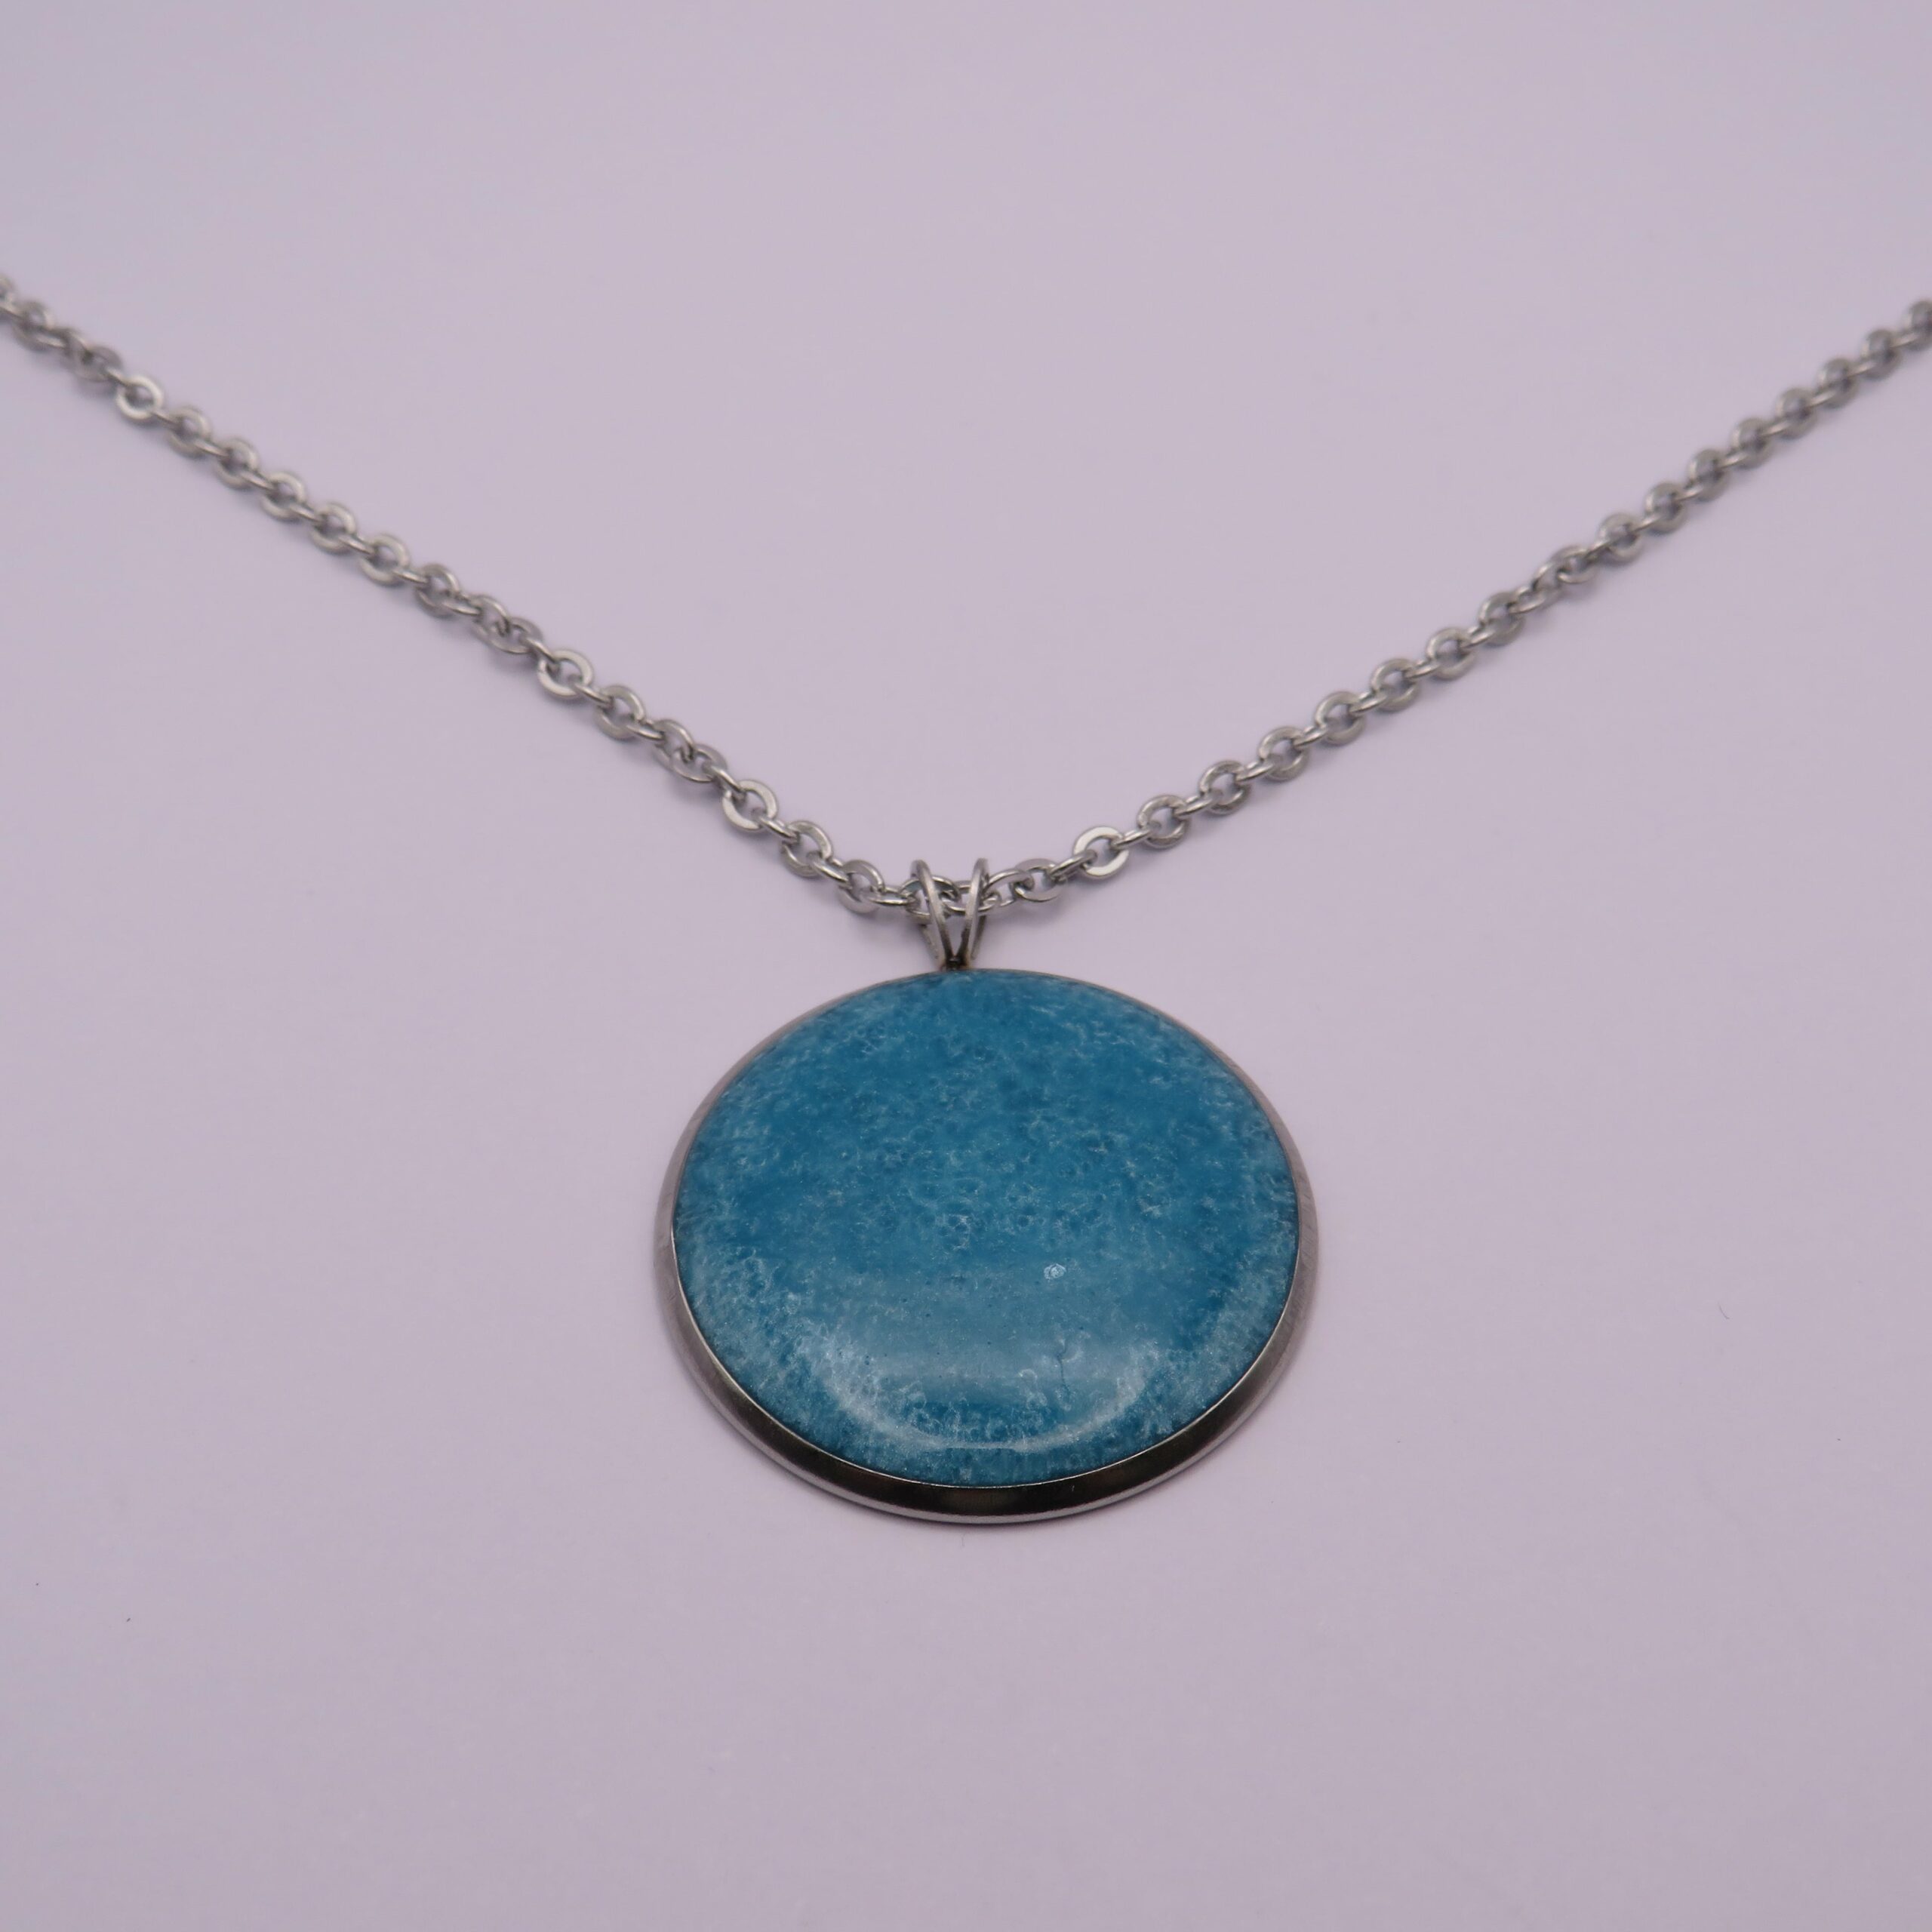 Stainless Steel Long Large Blue Cabochon Pendant Necklace